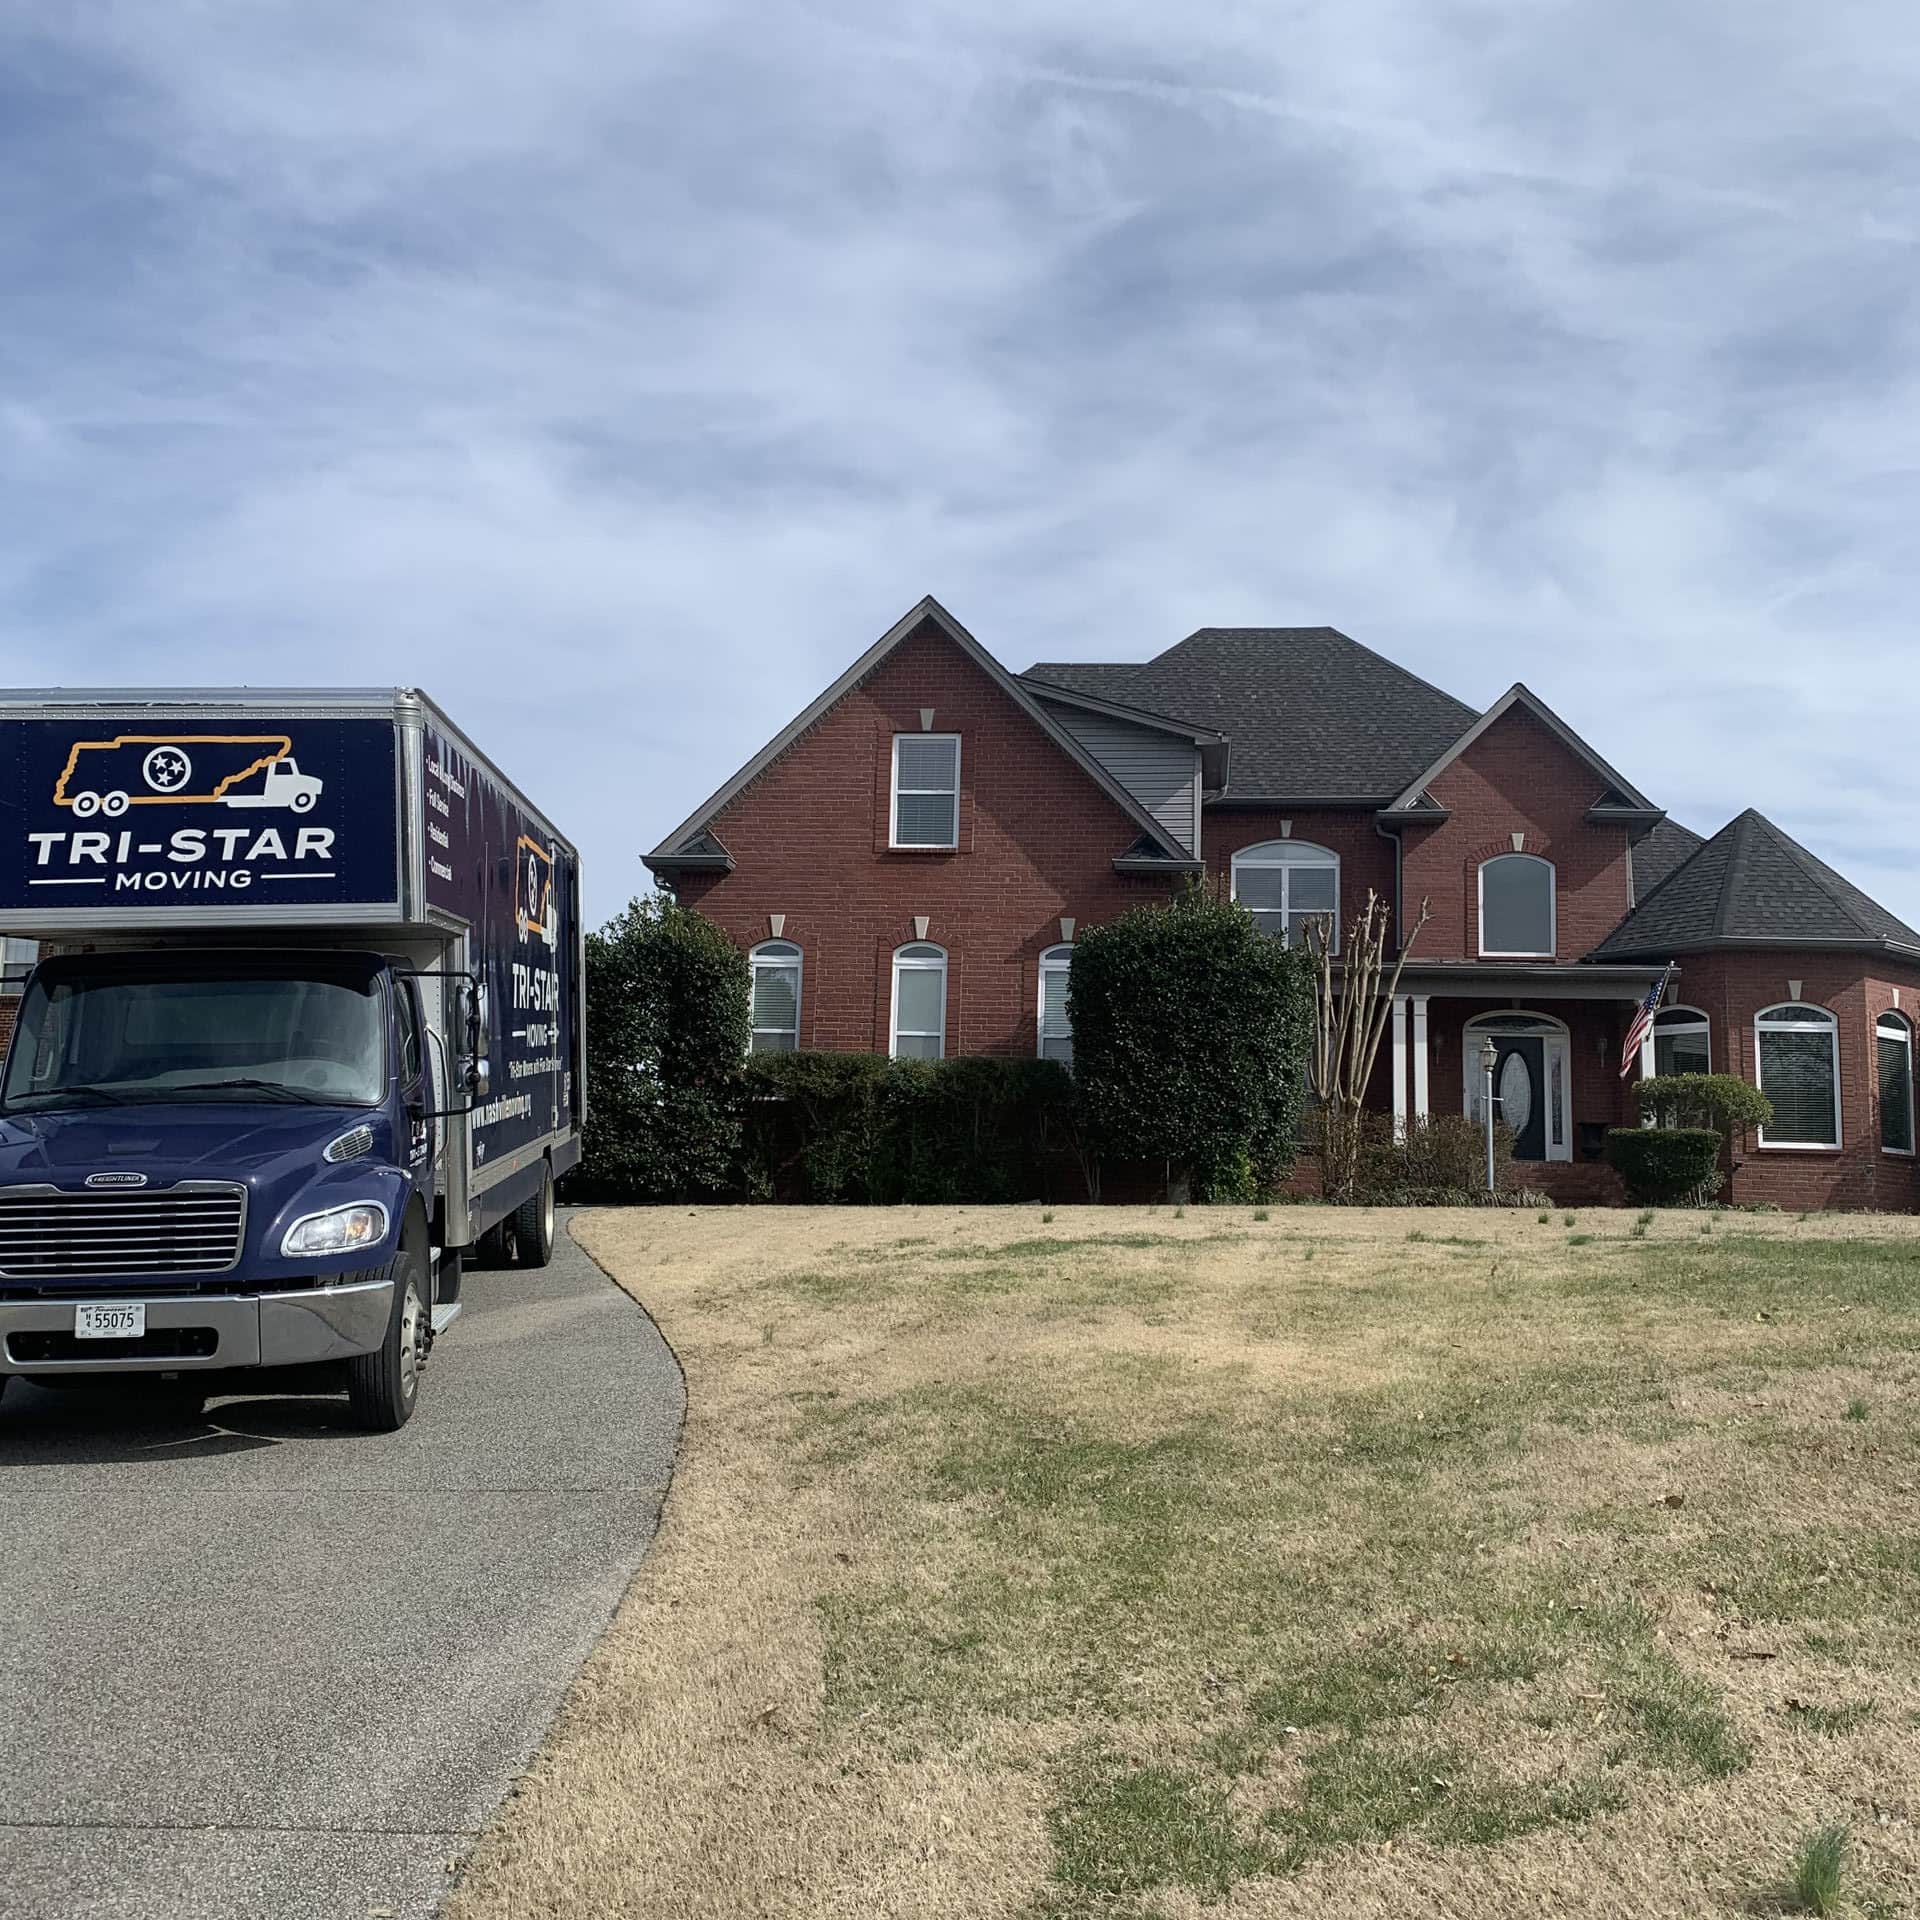 Ouside shot of home with Tri-Star Moving truck